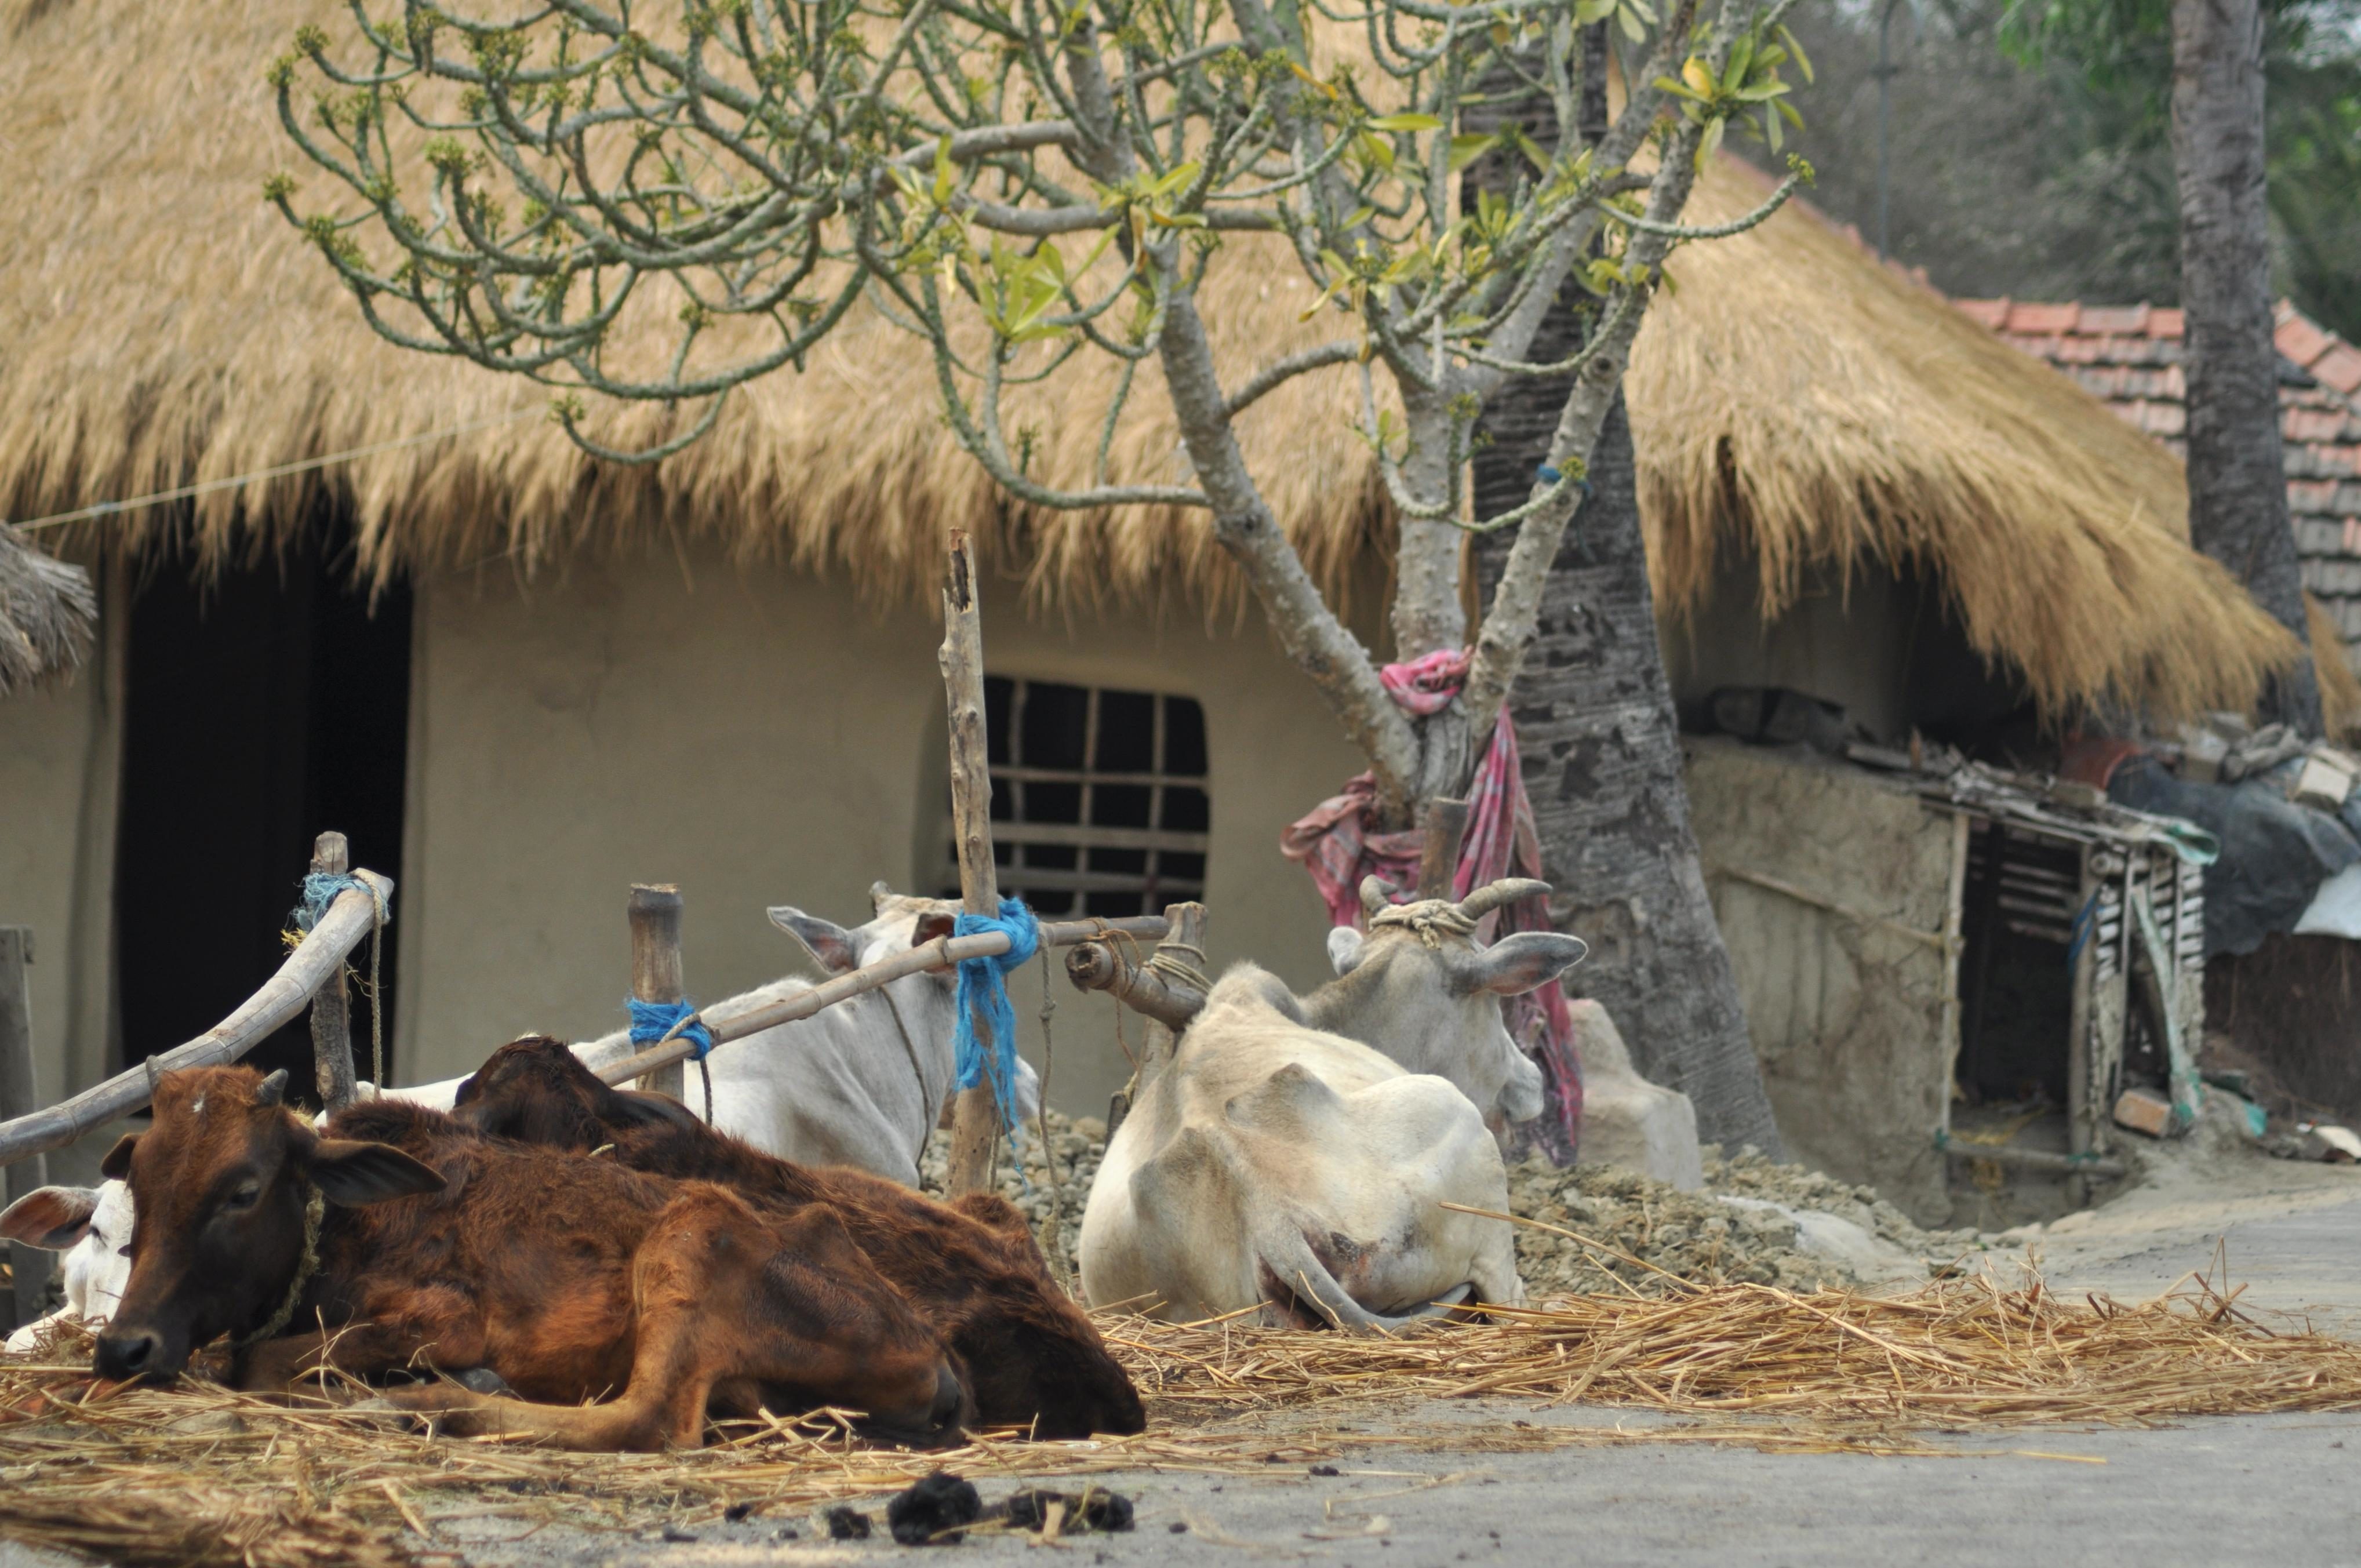 Free picture: India, village, cow, livestock, animal, cattle